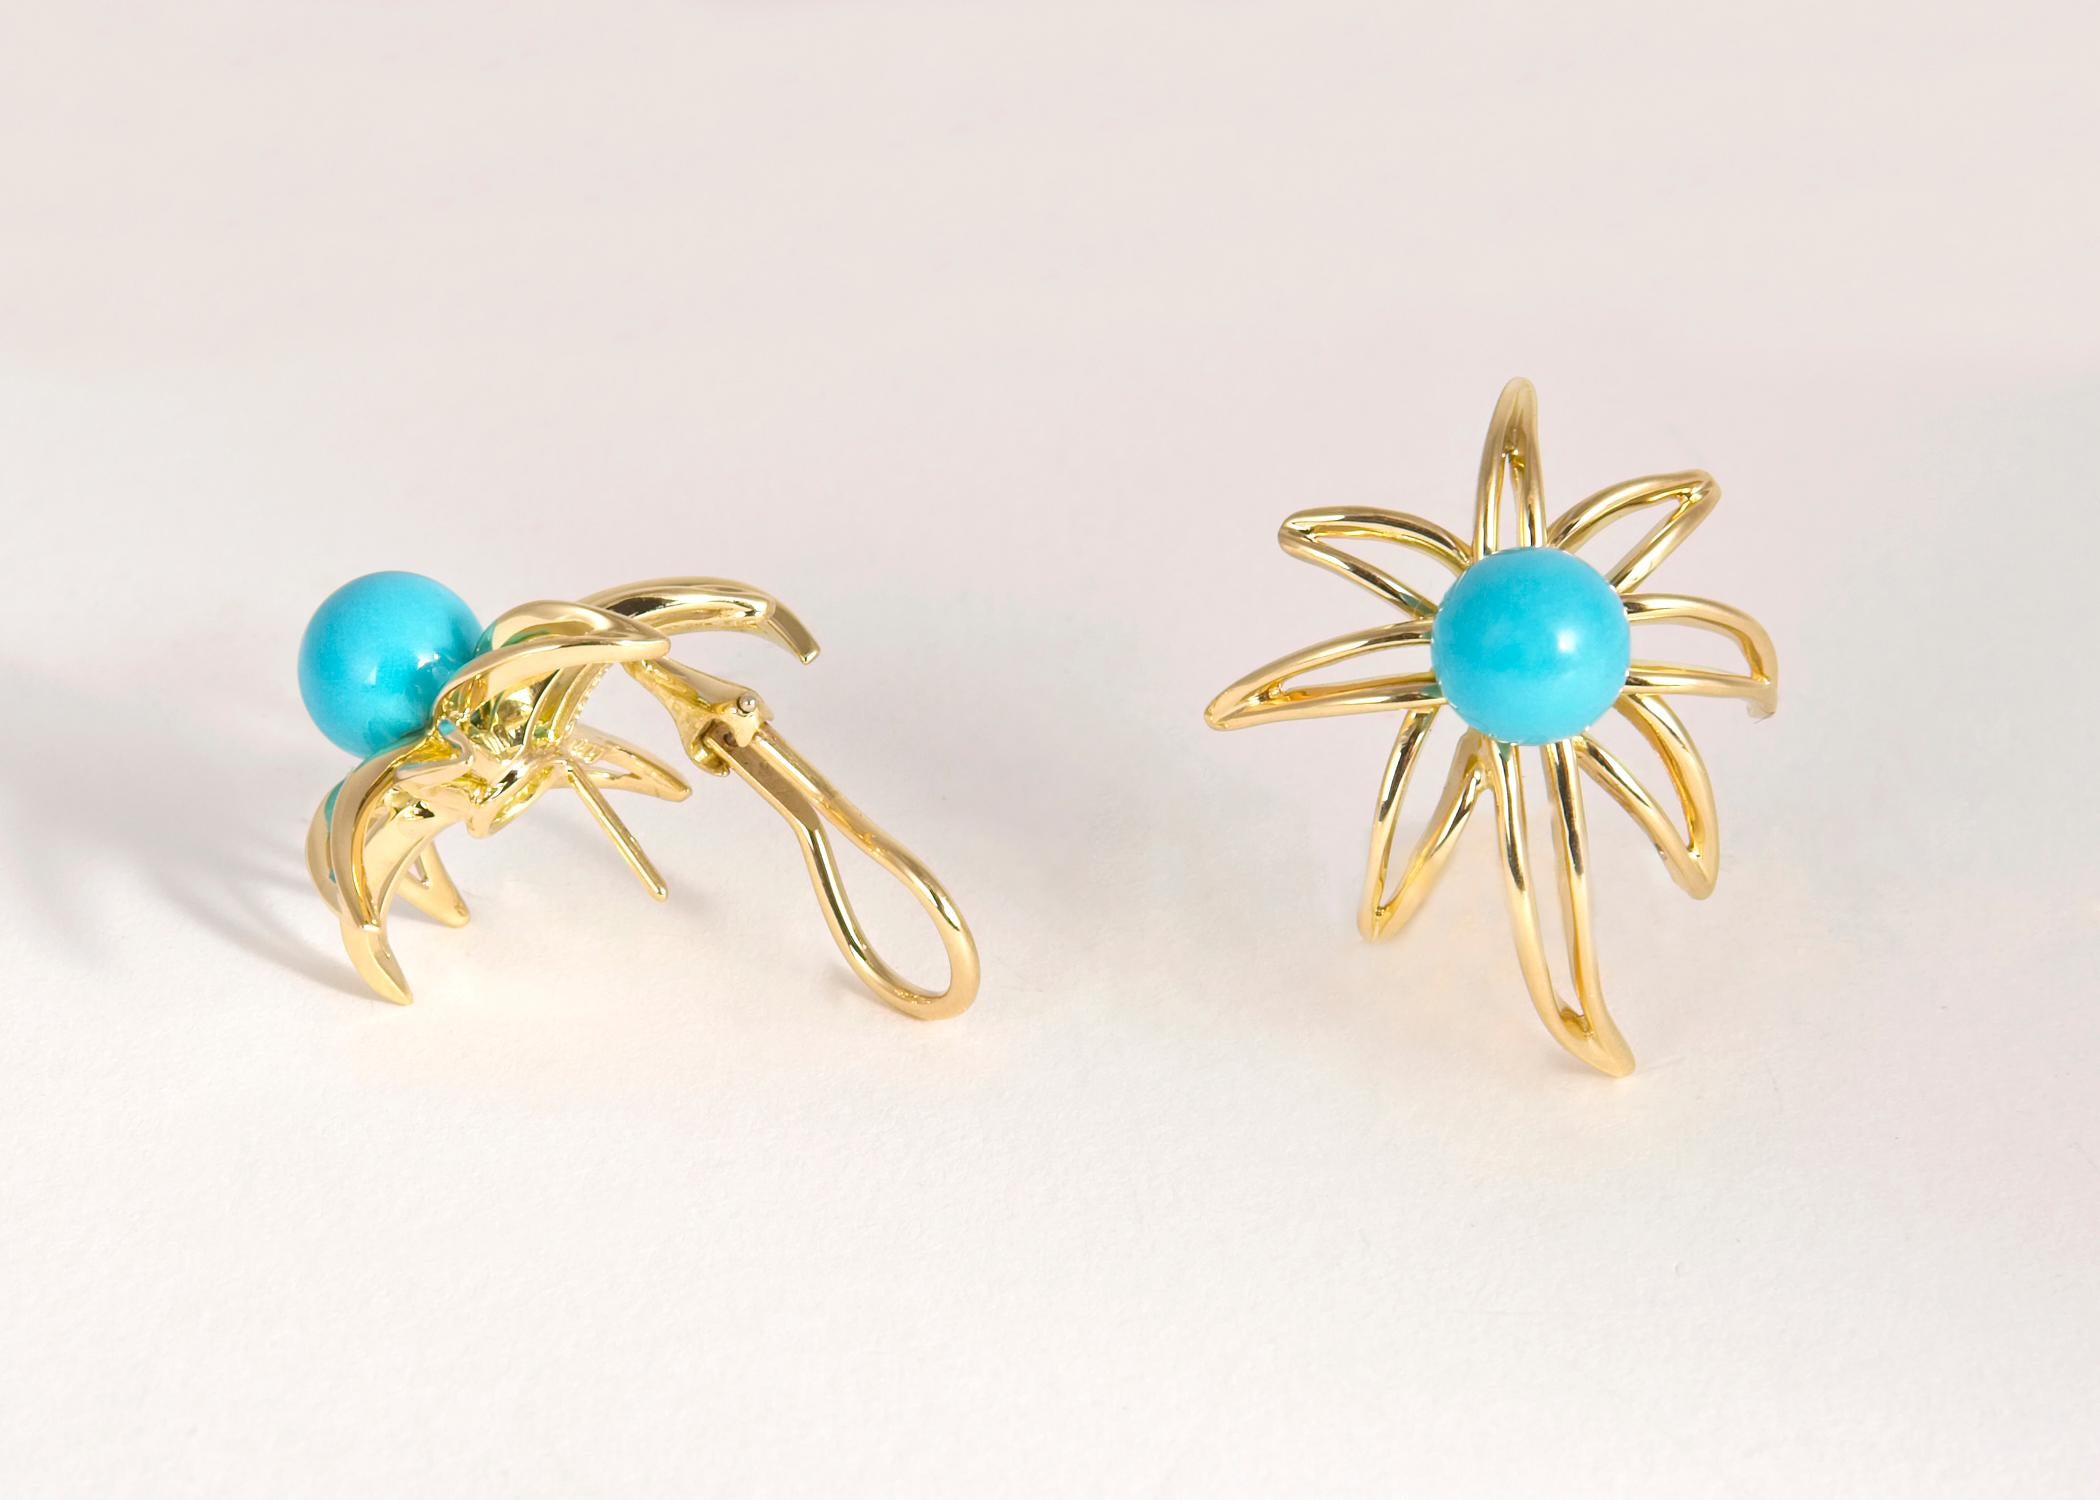 A Tiffany & Co. classic. The fireworks collection is rarely offered with turquoise. Approximately 1 inch in size.